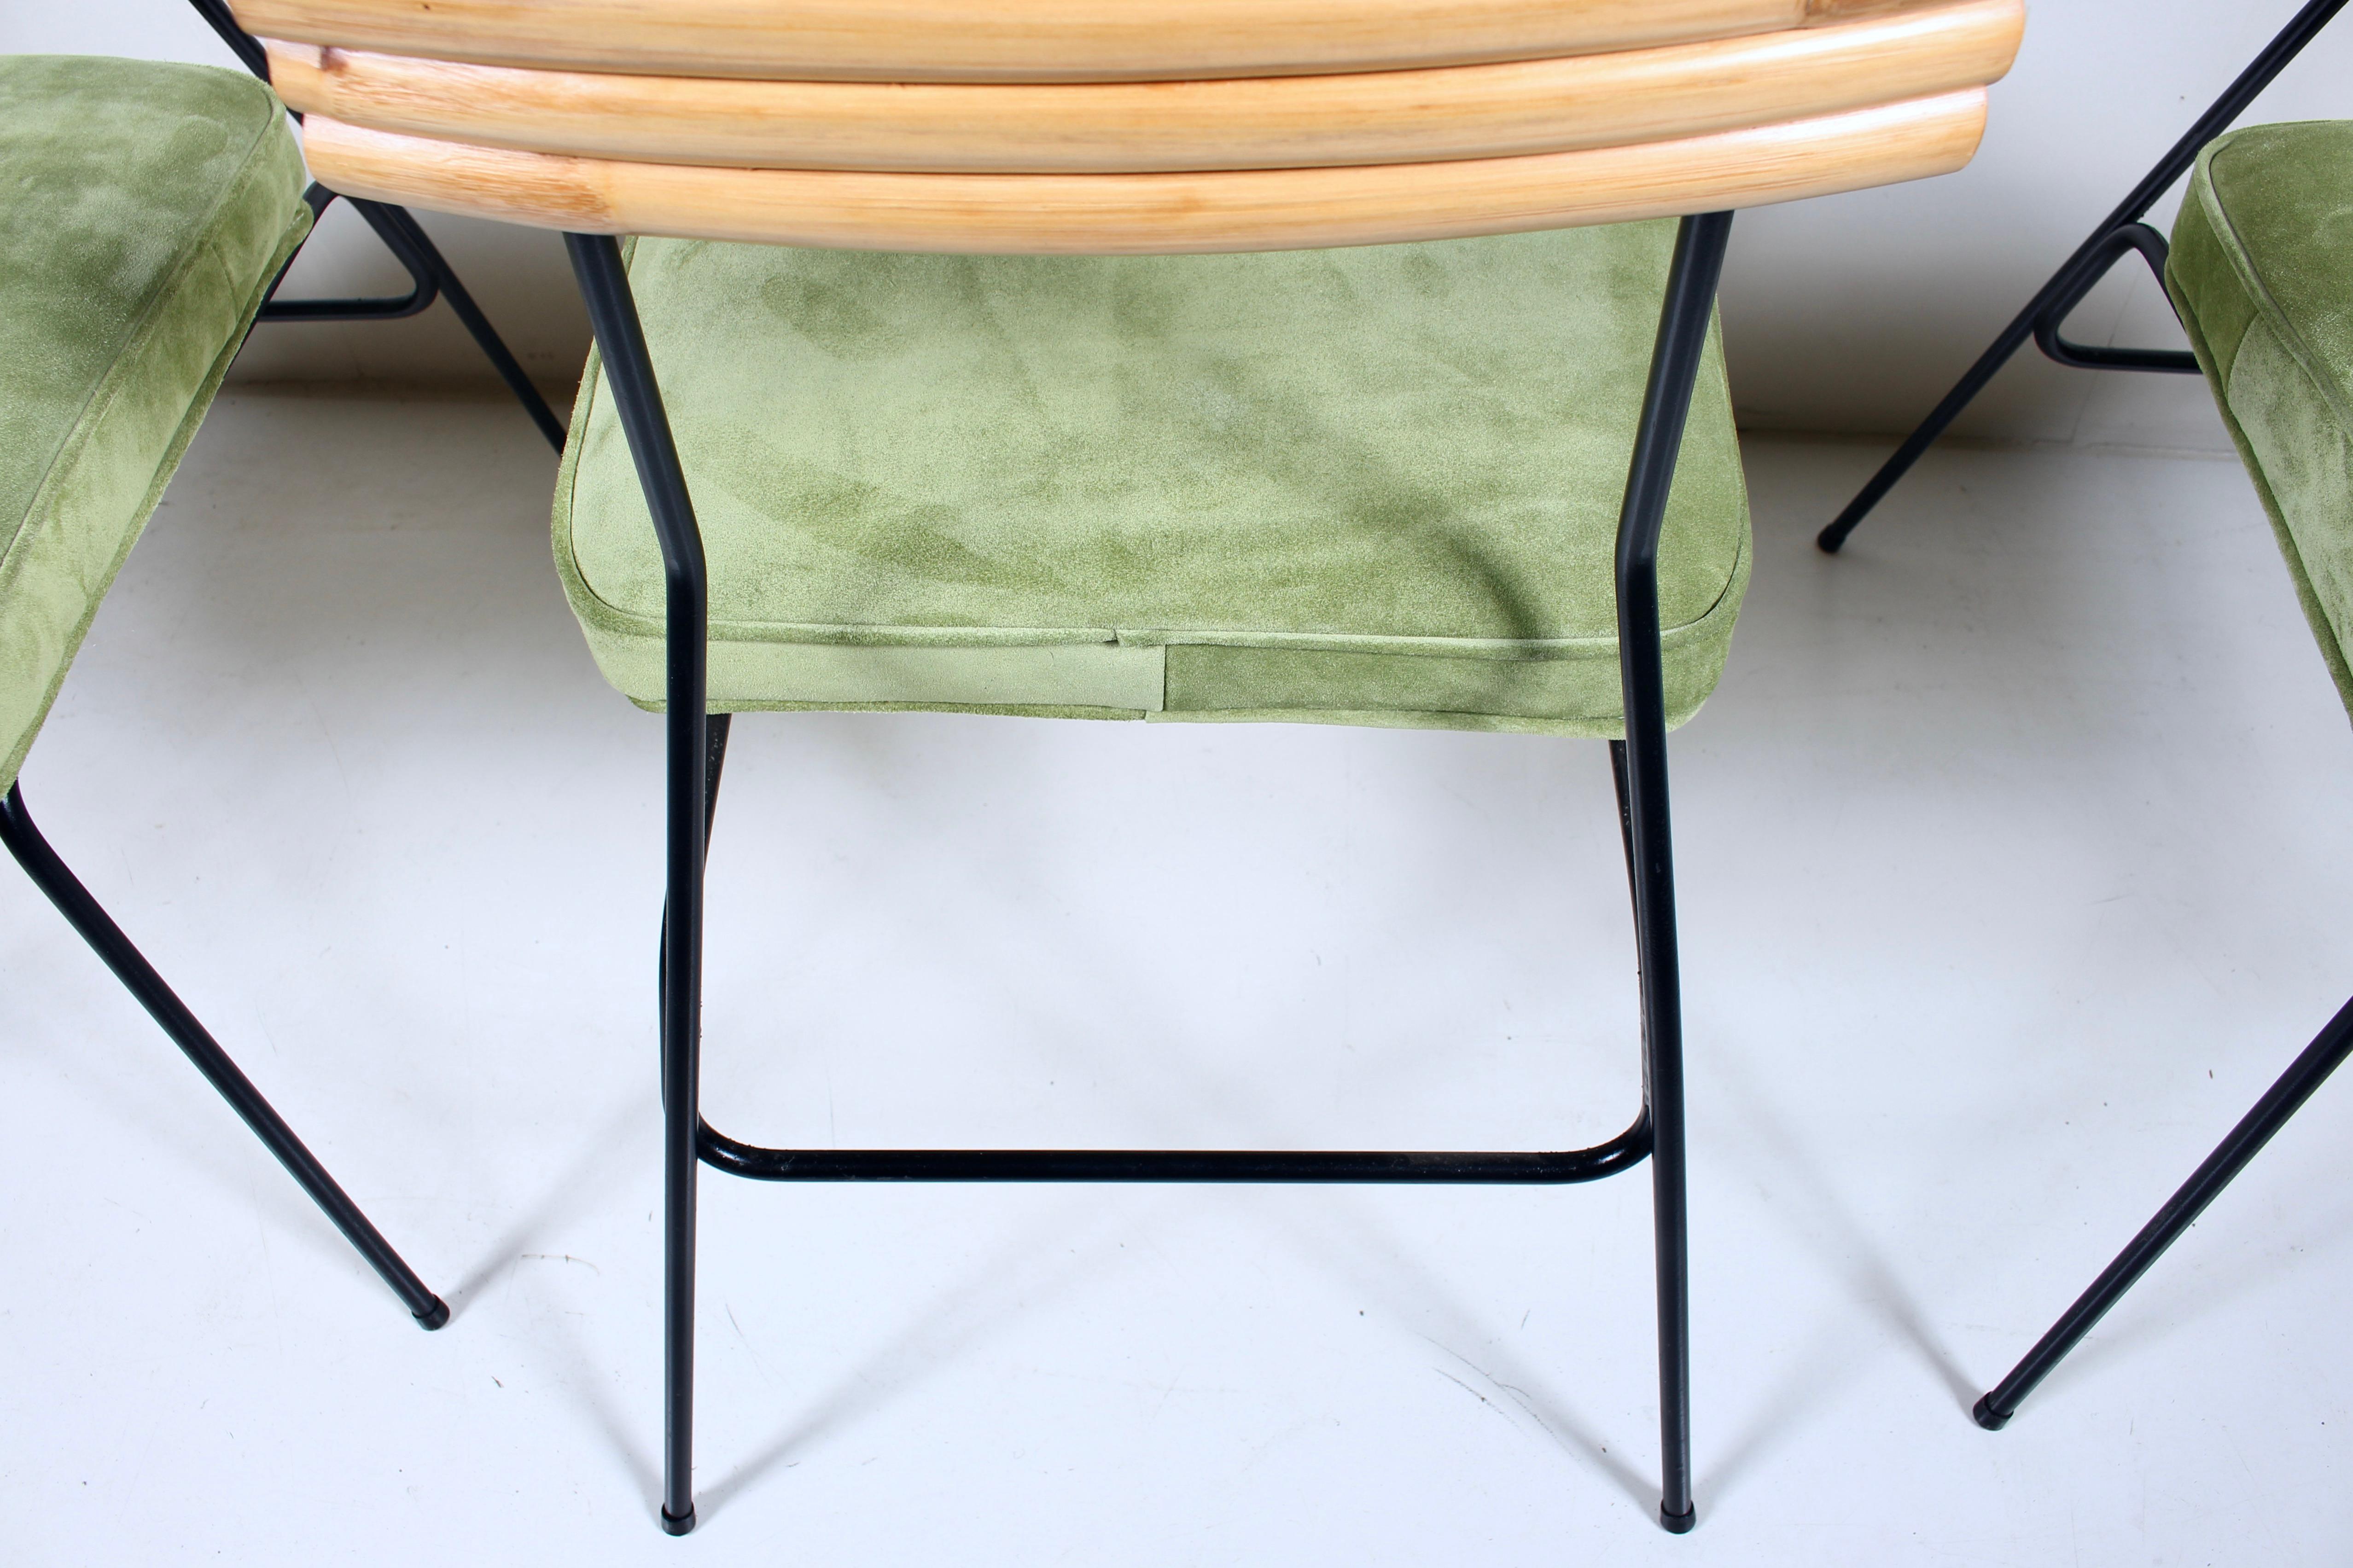 Set of 4 Herb & Shirley Ritts Iron, Bamboo & Suede Dining Side Chairs, 1950s For Sale 6